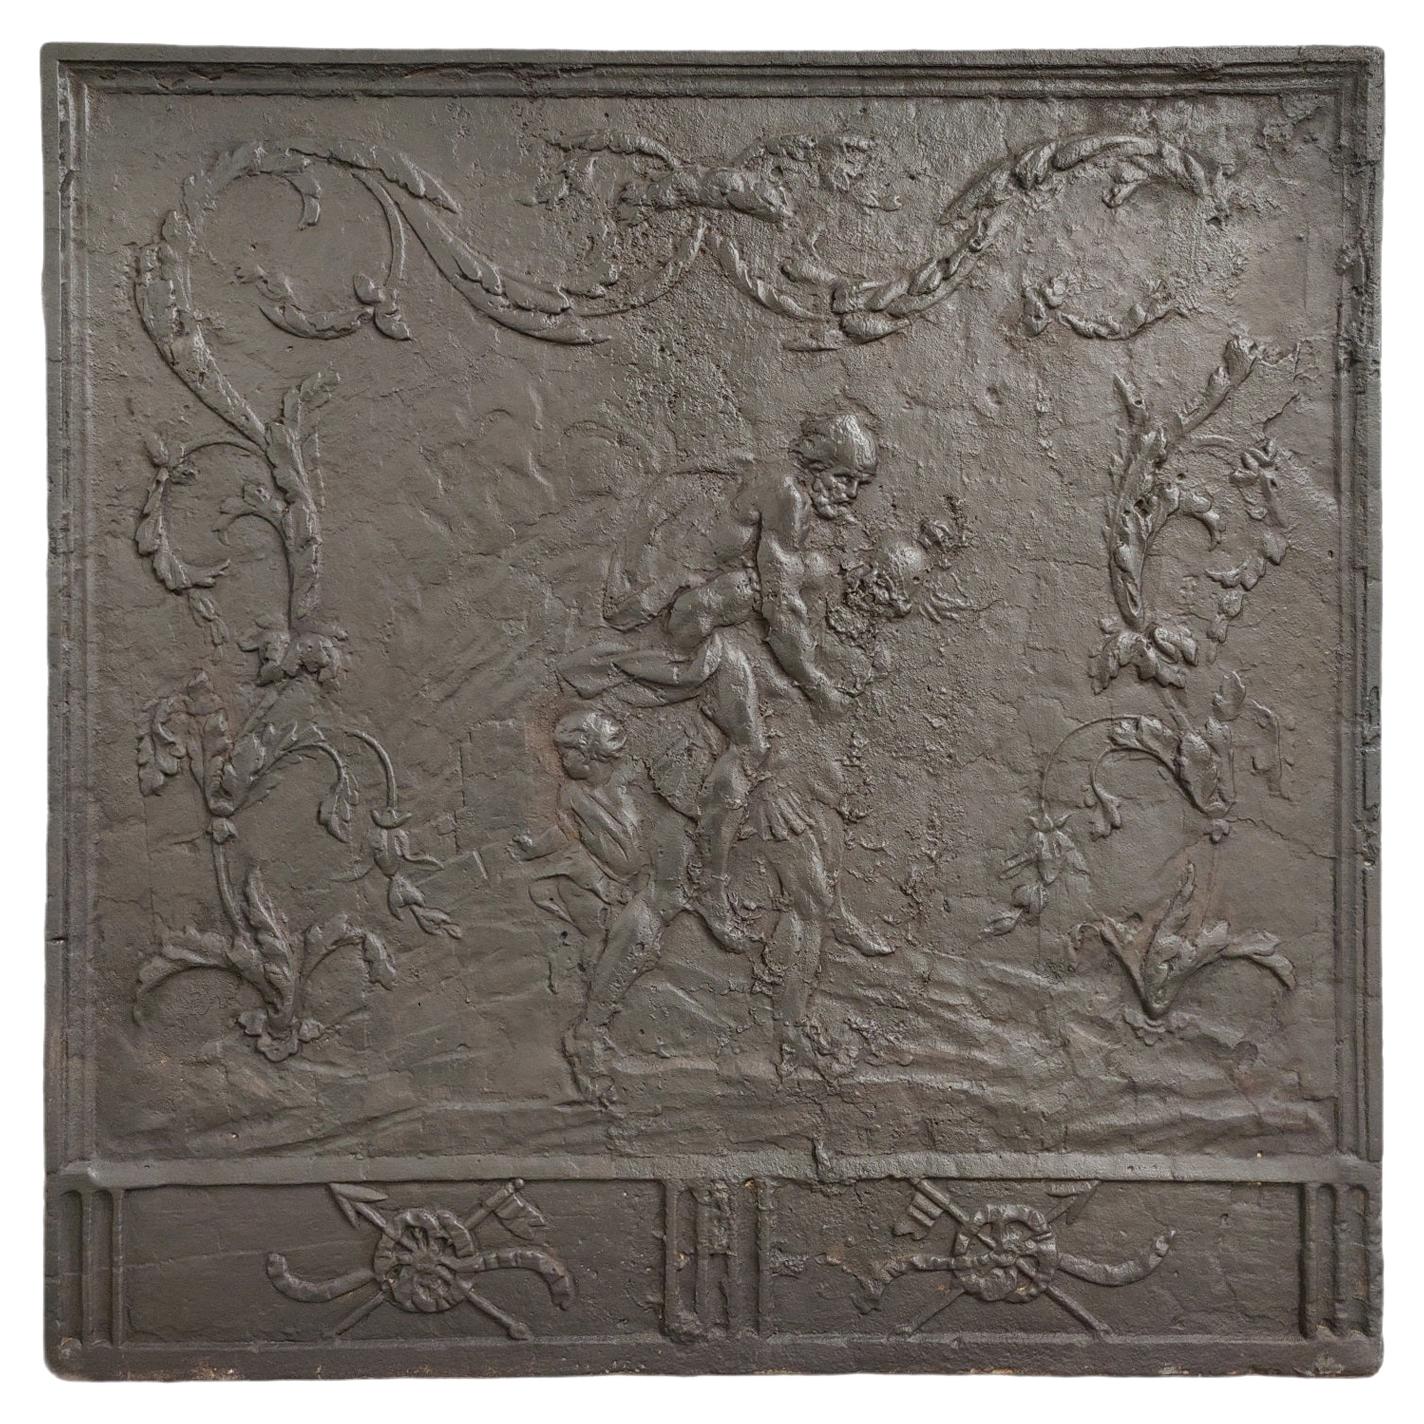 Antique Fireback / Backsplash, Carrying "The Wounded" For Sale